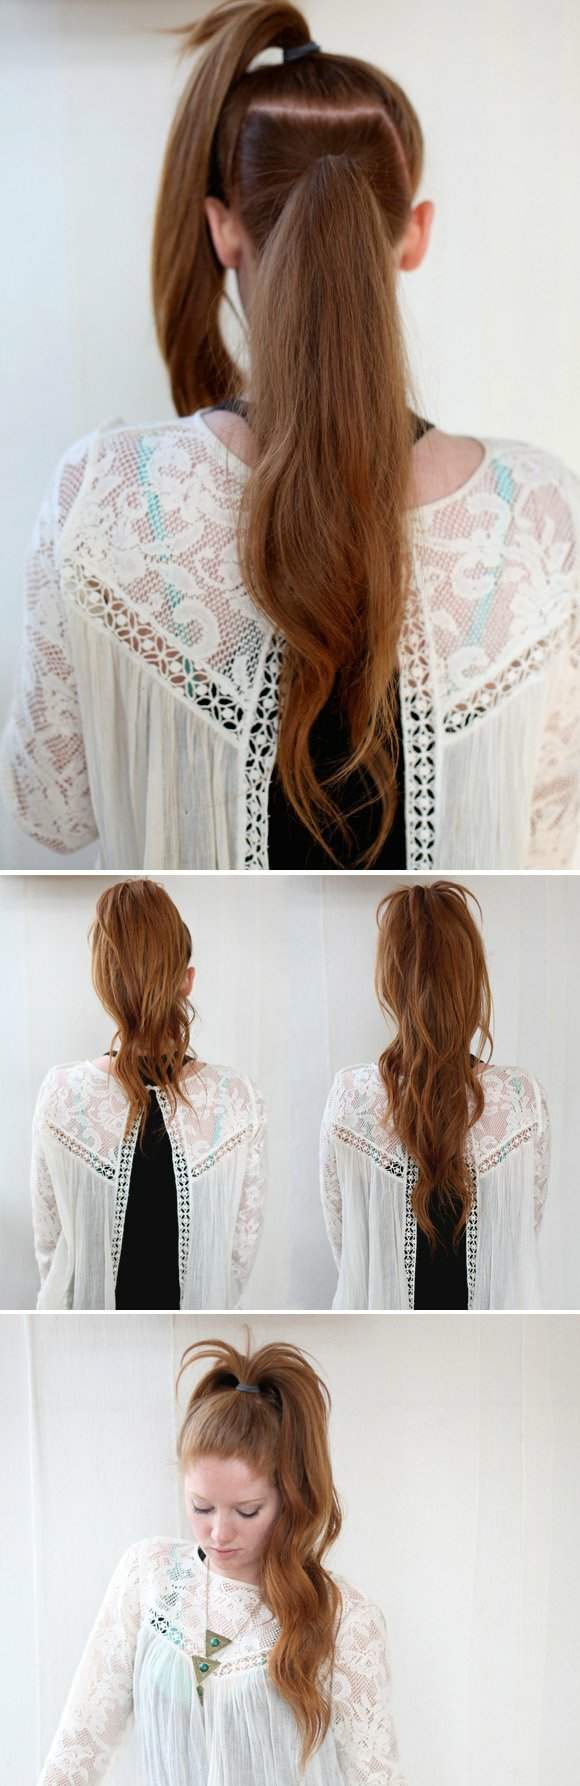 idea hairstyle woman tail horse high